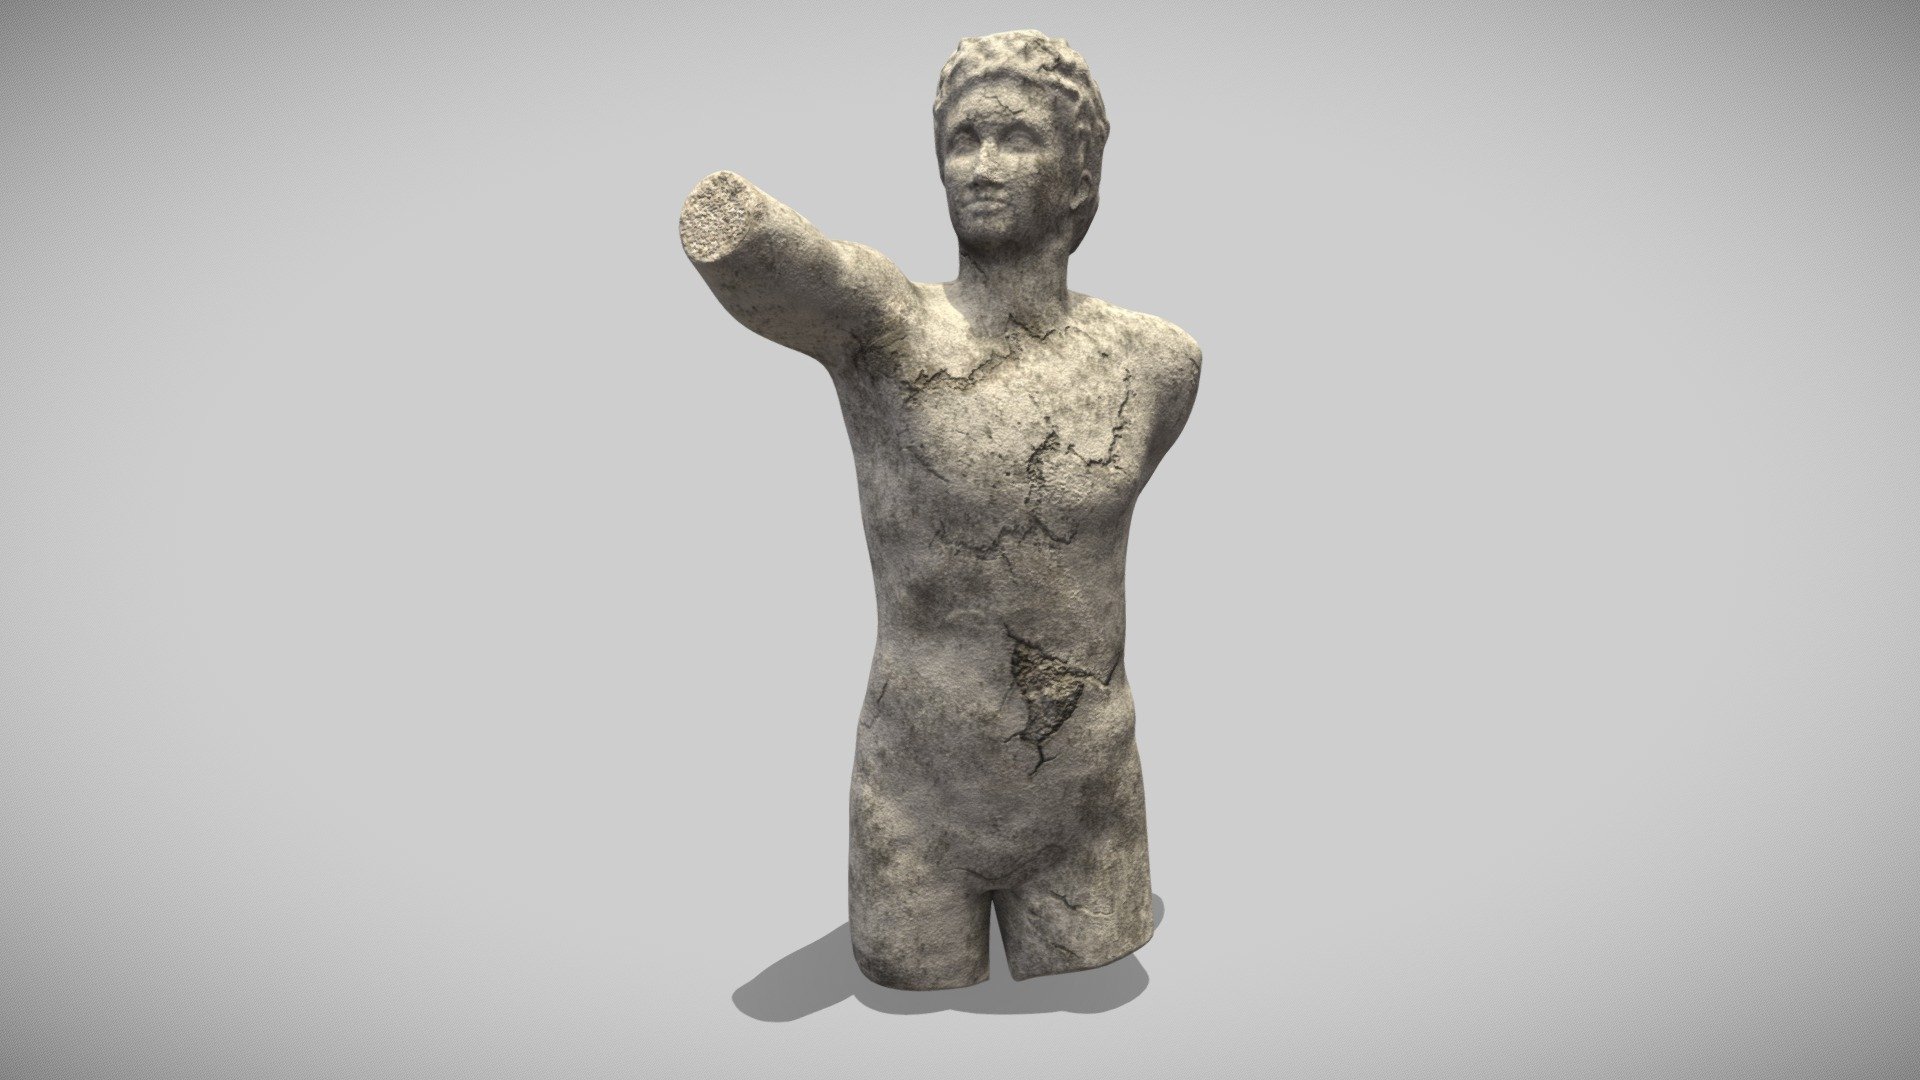 Broken marble statue inspired from a mix of the Greek architecture and the aesthetic of Atlantis the underwater city 3d model